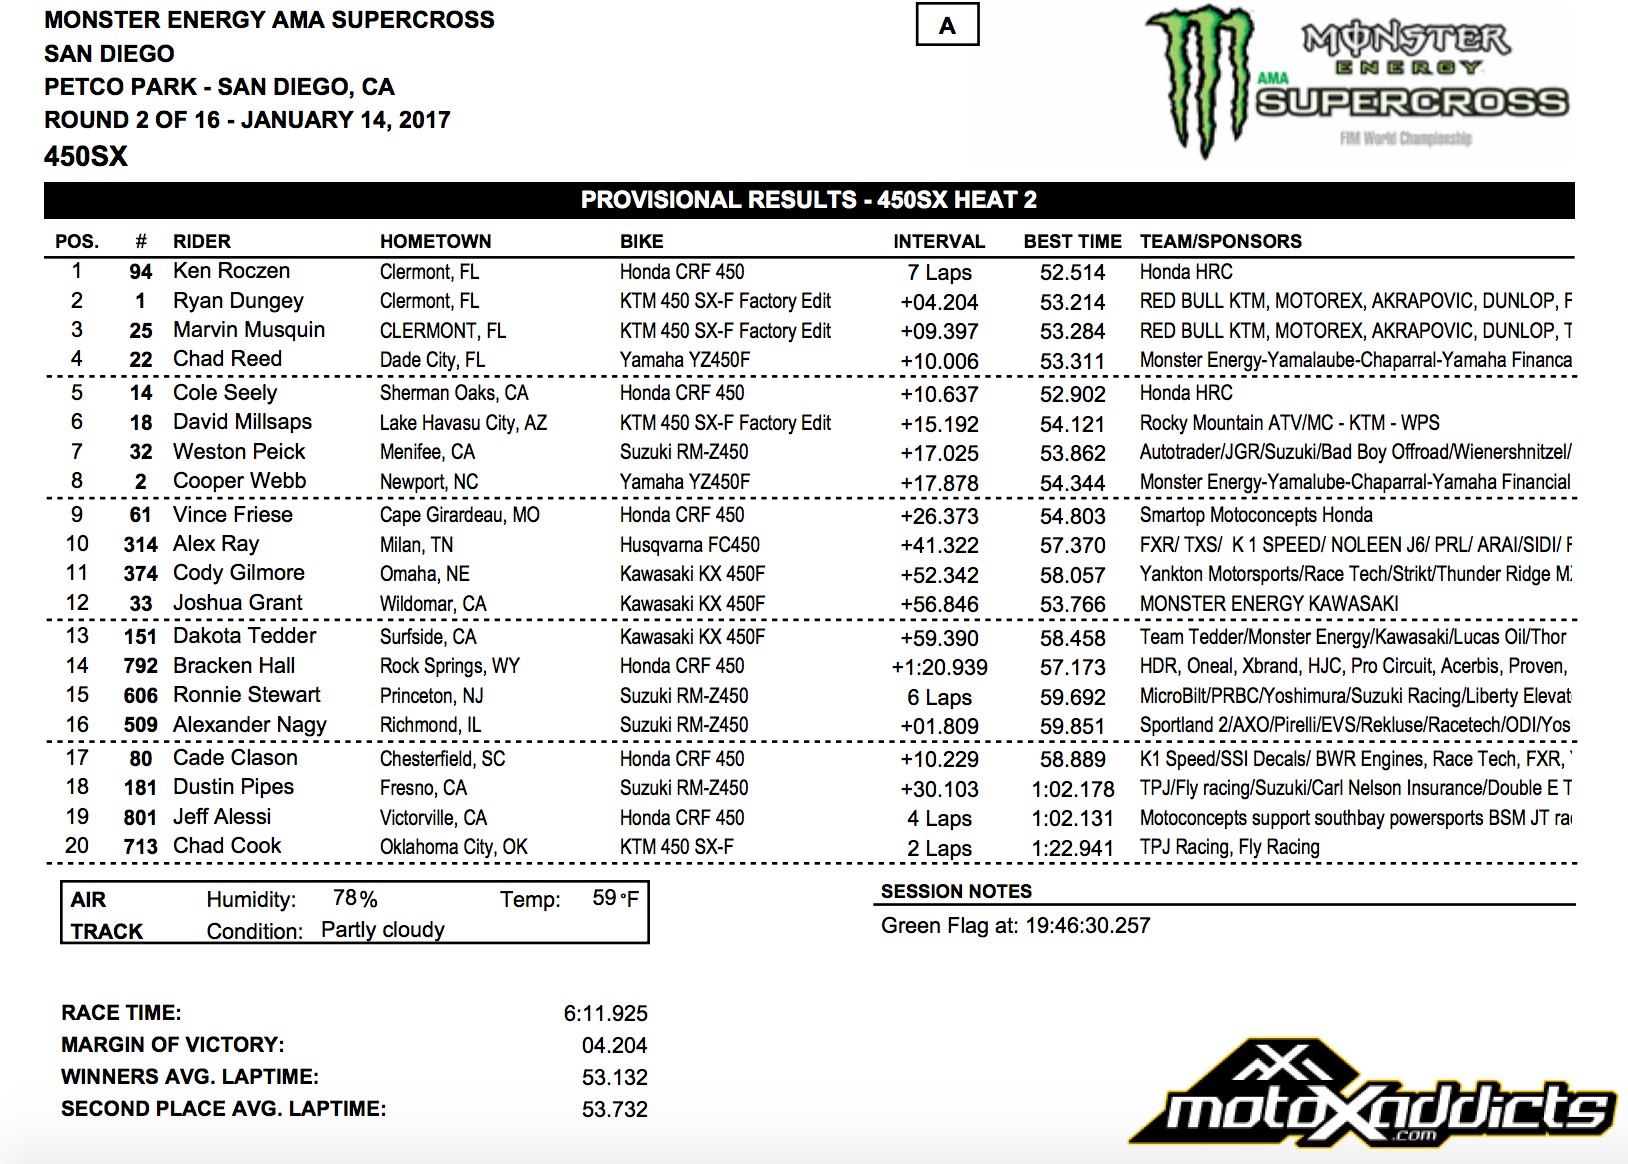 450SX Heat 2 Race Results - 2017 San Diego SX - Click to Enlarge